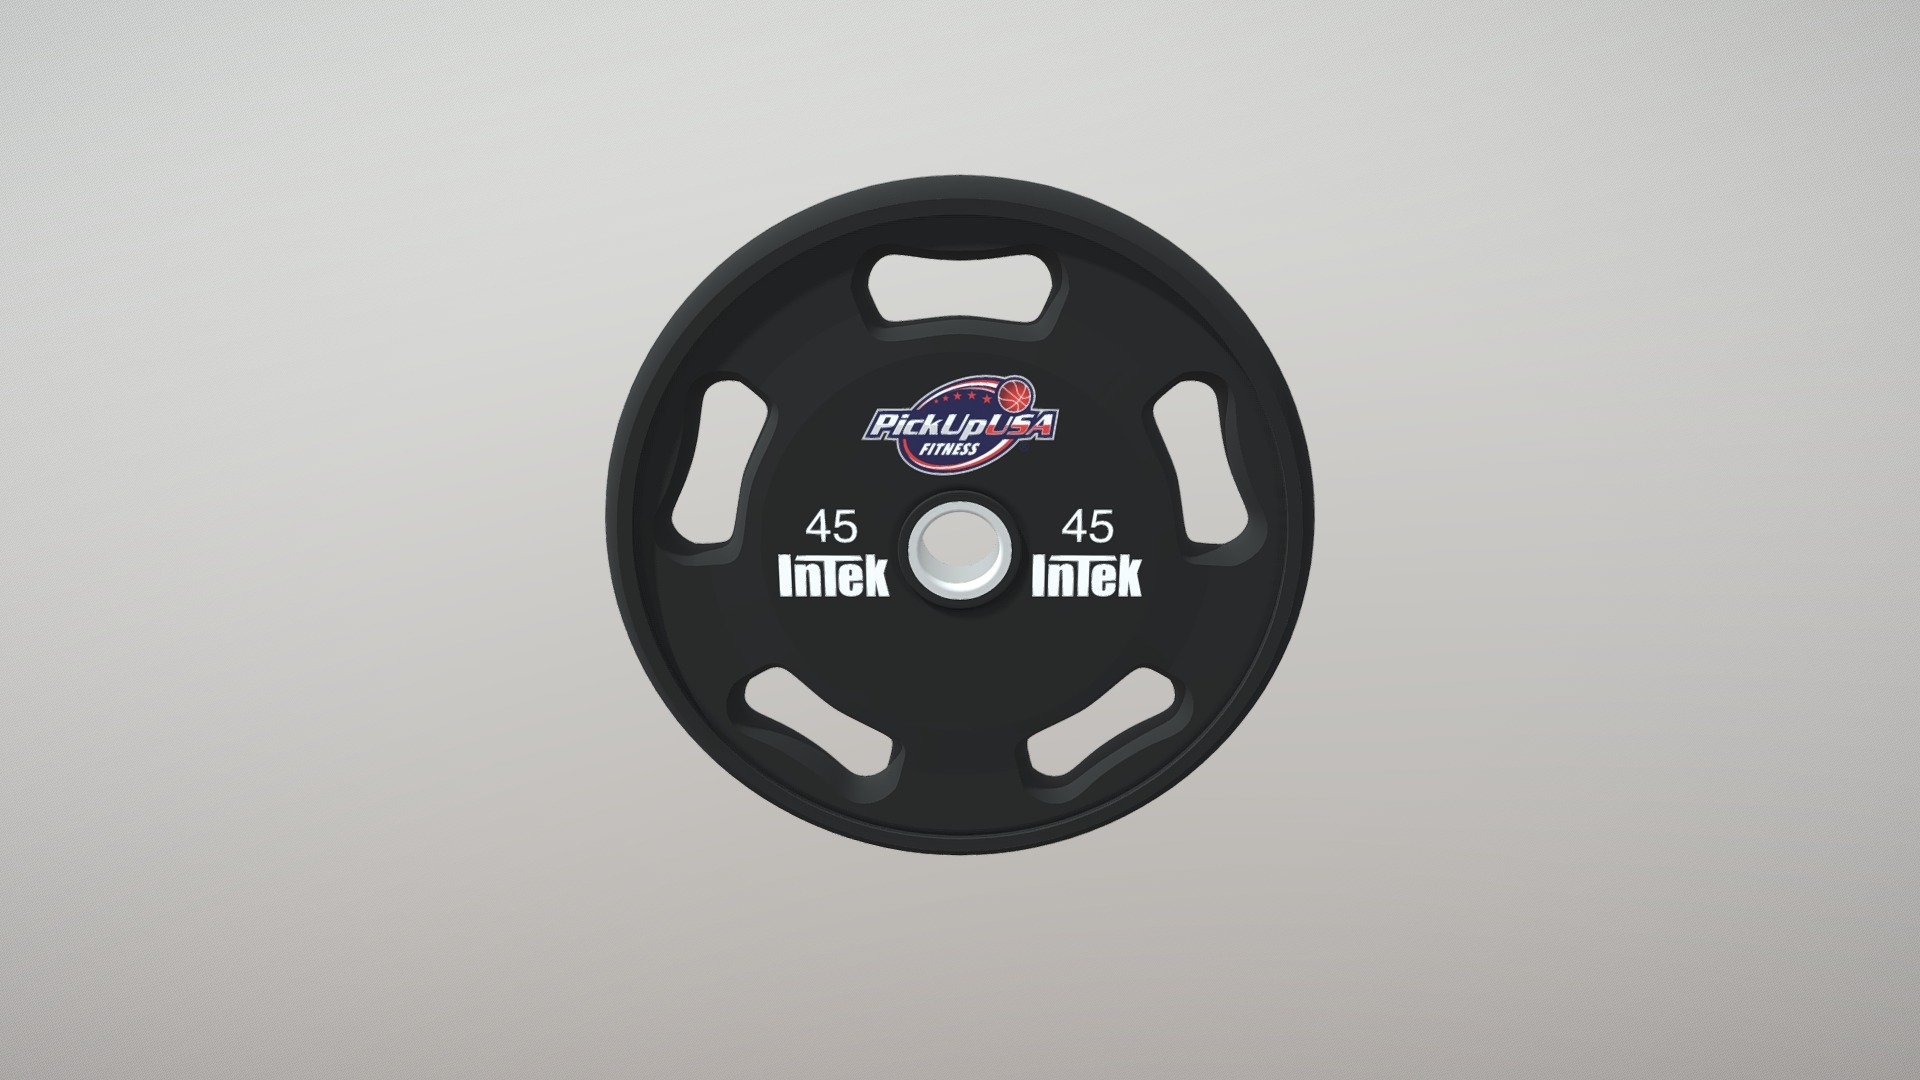 Intek Urethane Olympic Grip Plate customized with PickUp USA Fitness branding; 45 lbs weight; black color 3d model